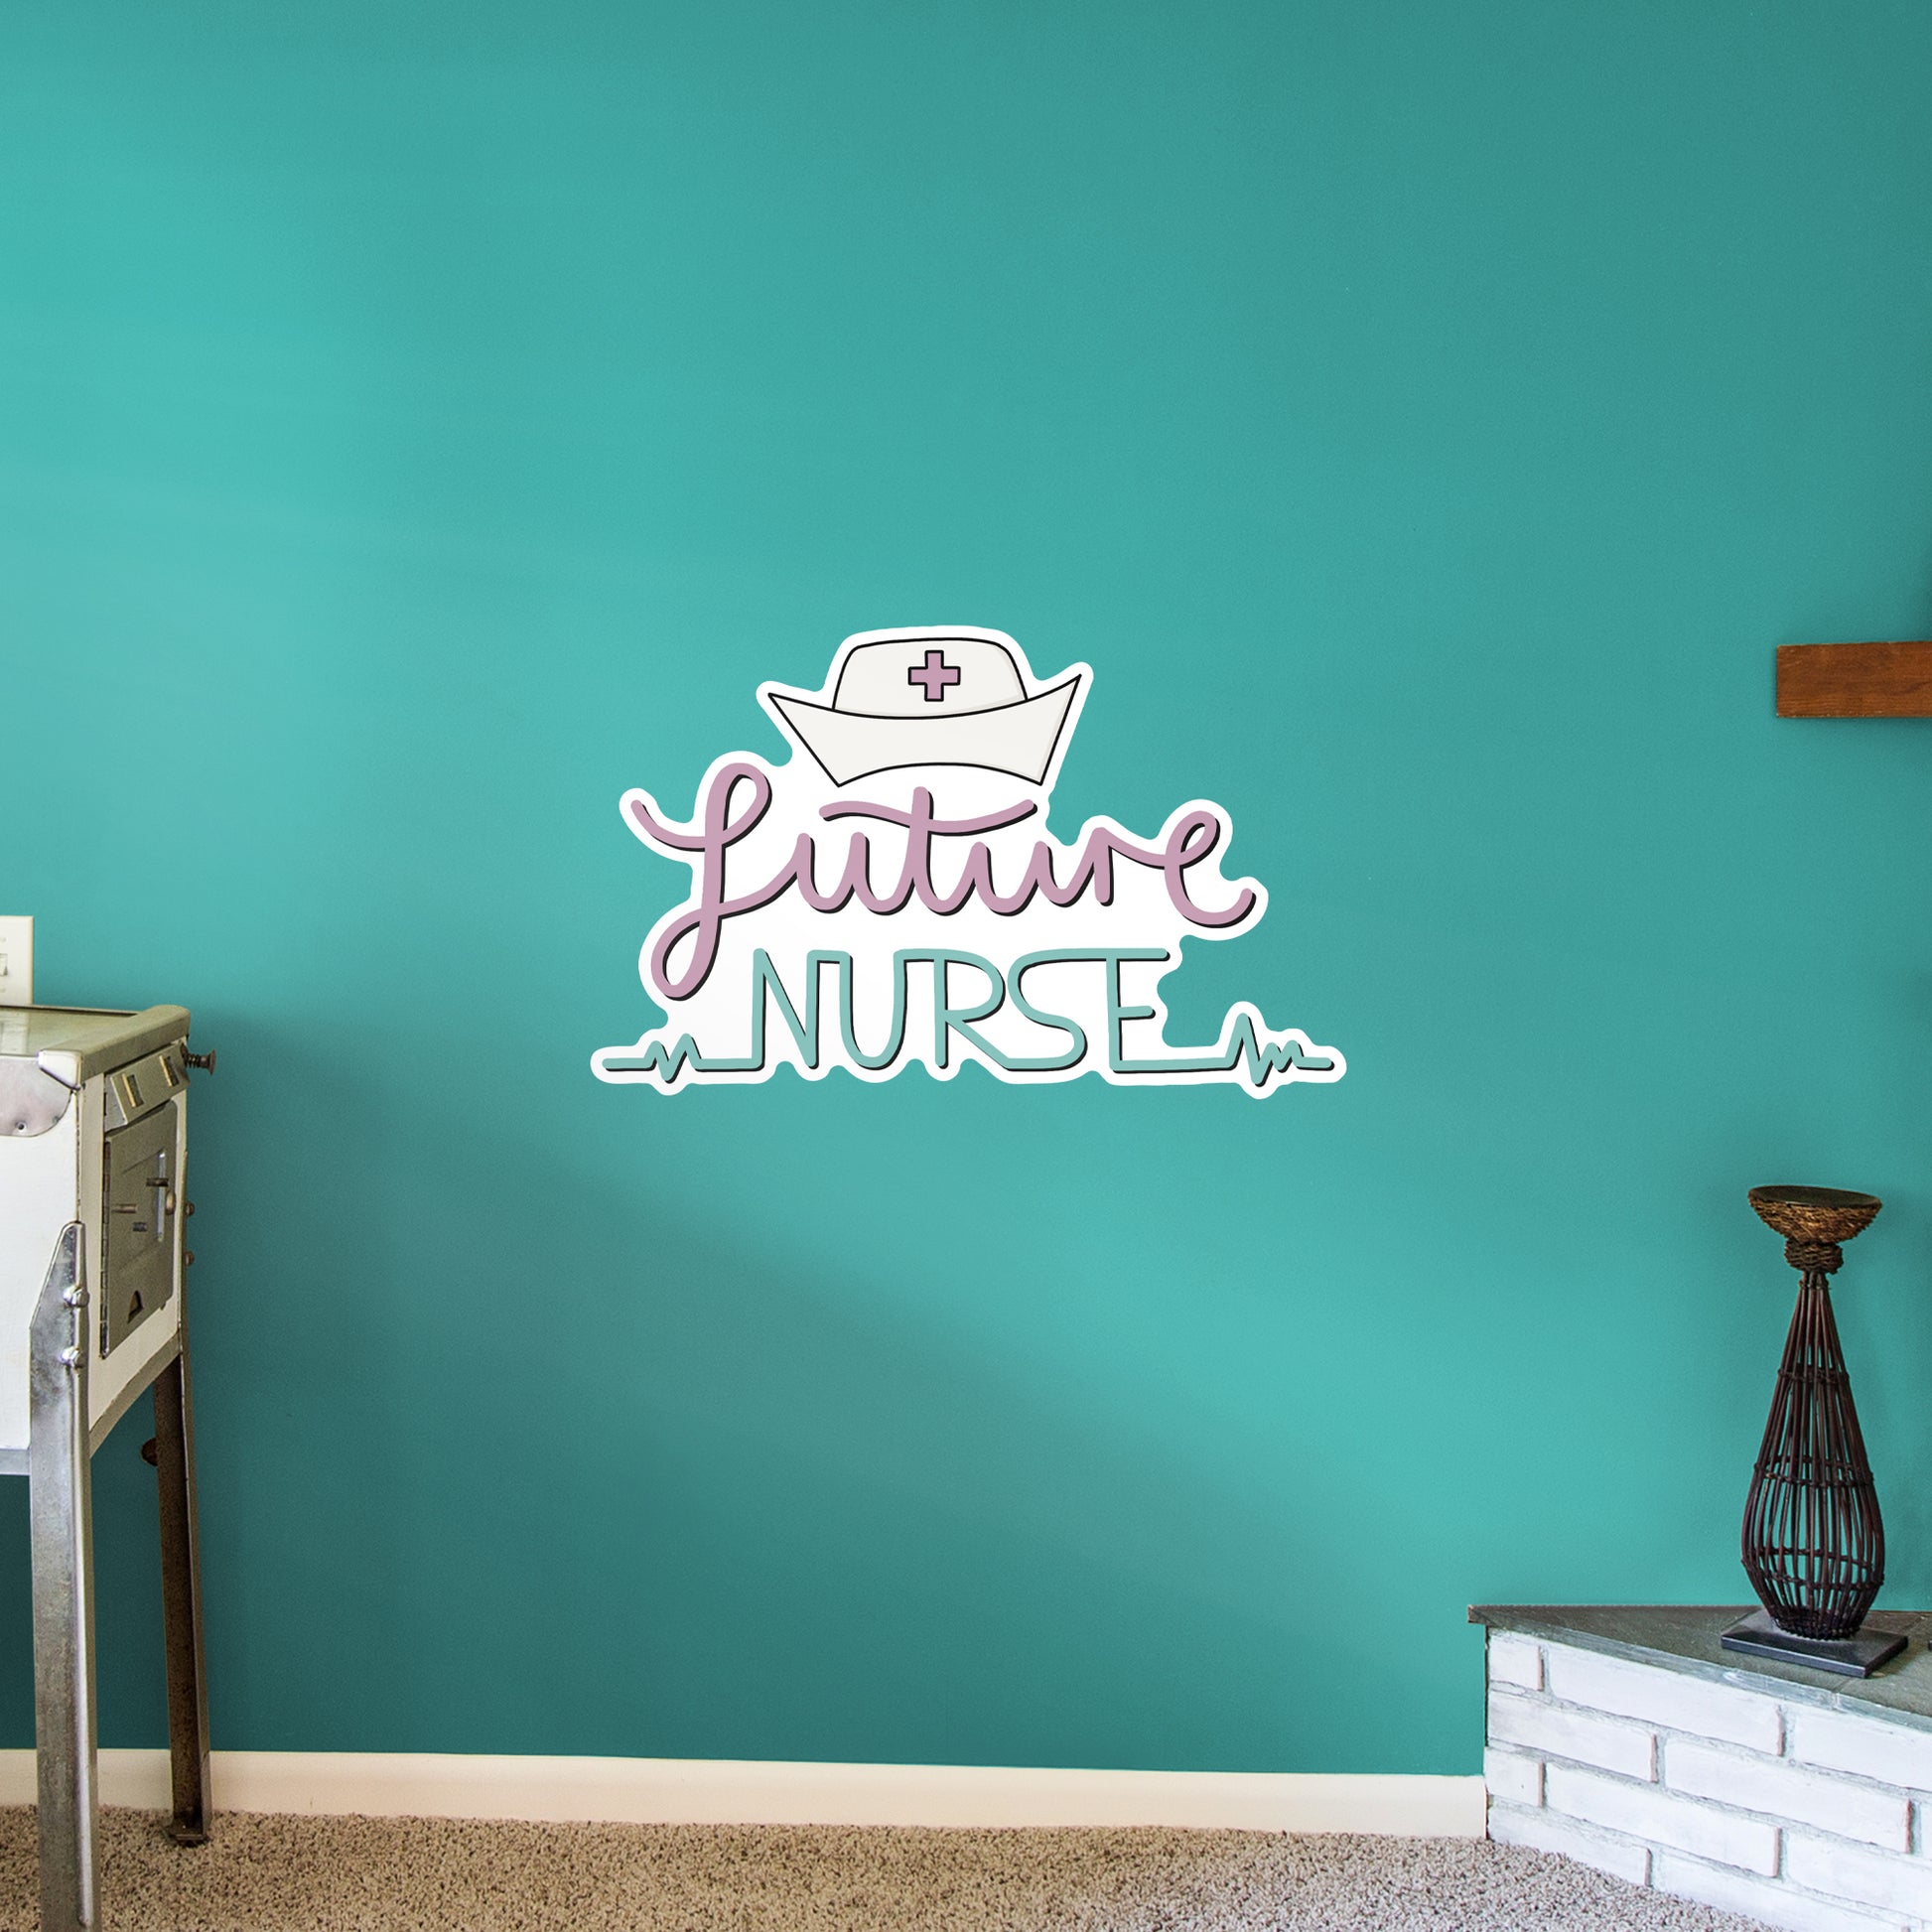 Future Nurse - Officially Licensed Big Moods Removable Wall Decal - Fathead | Giant Decal (31W x 50H) | Premium Wall Decals, Big Heads & More.